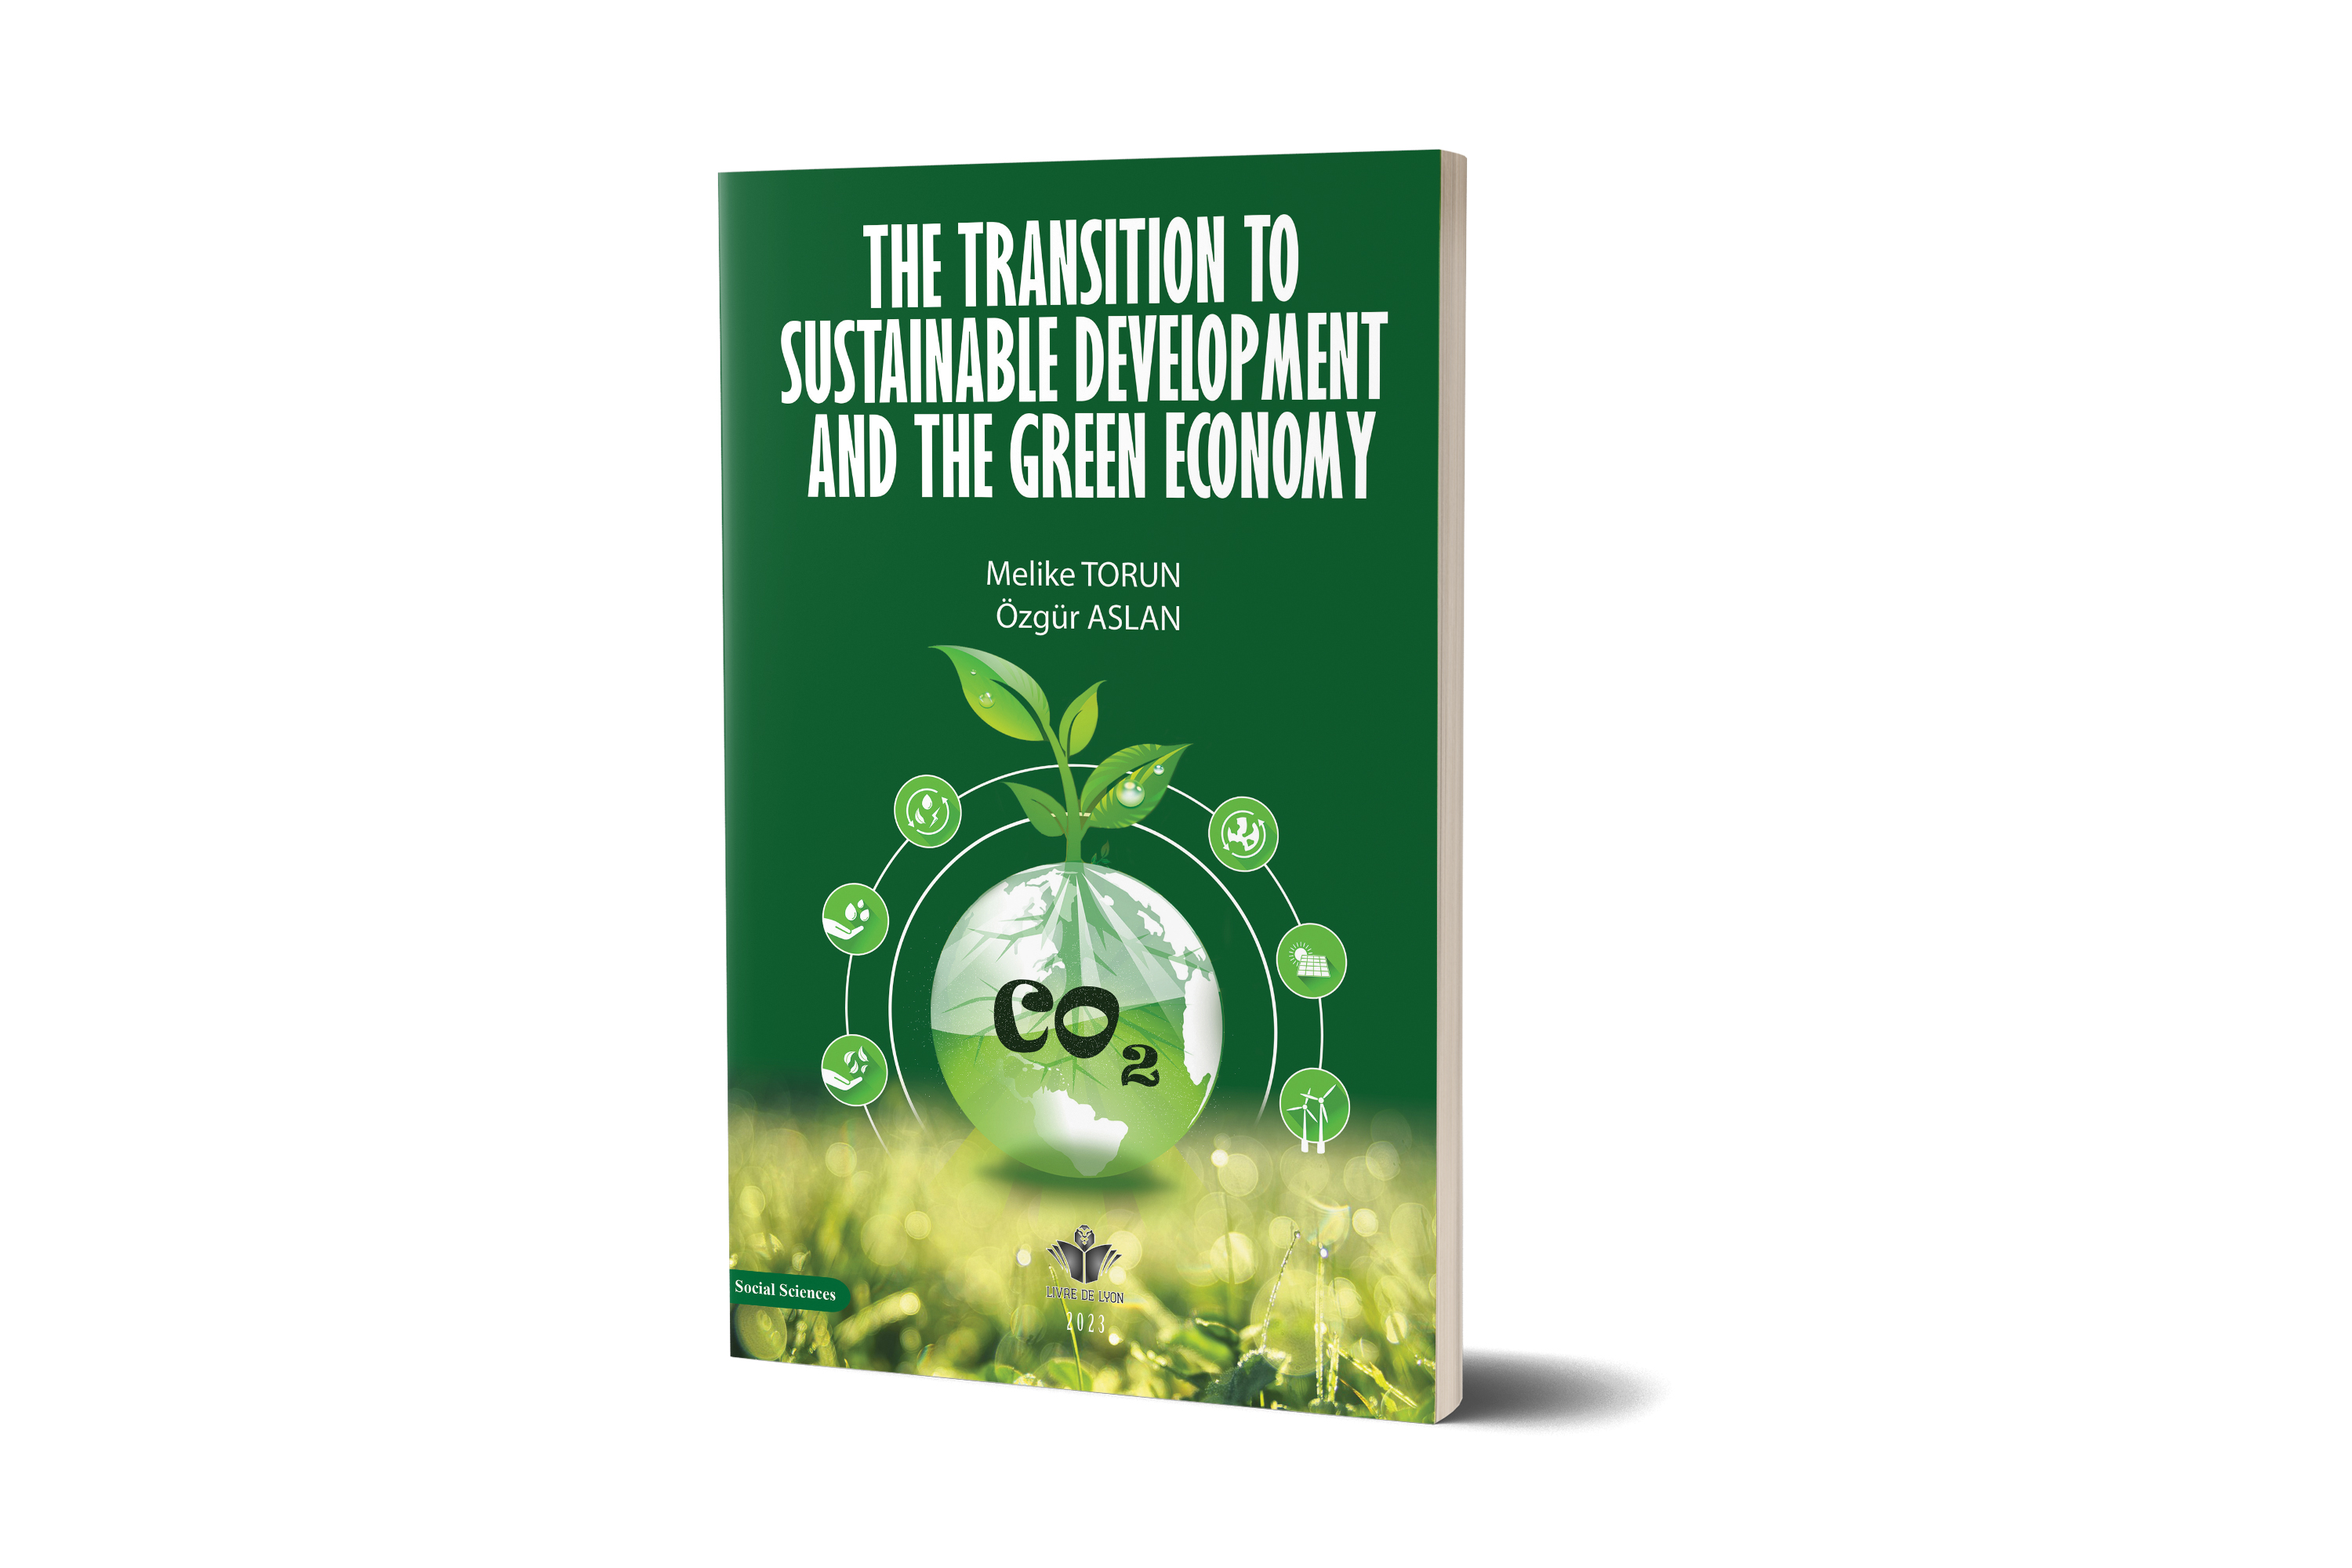 The Transition to Sustainable Development and the Green Economy